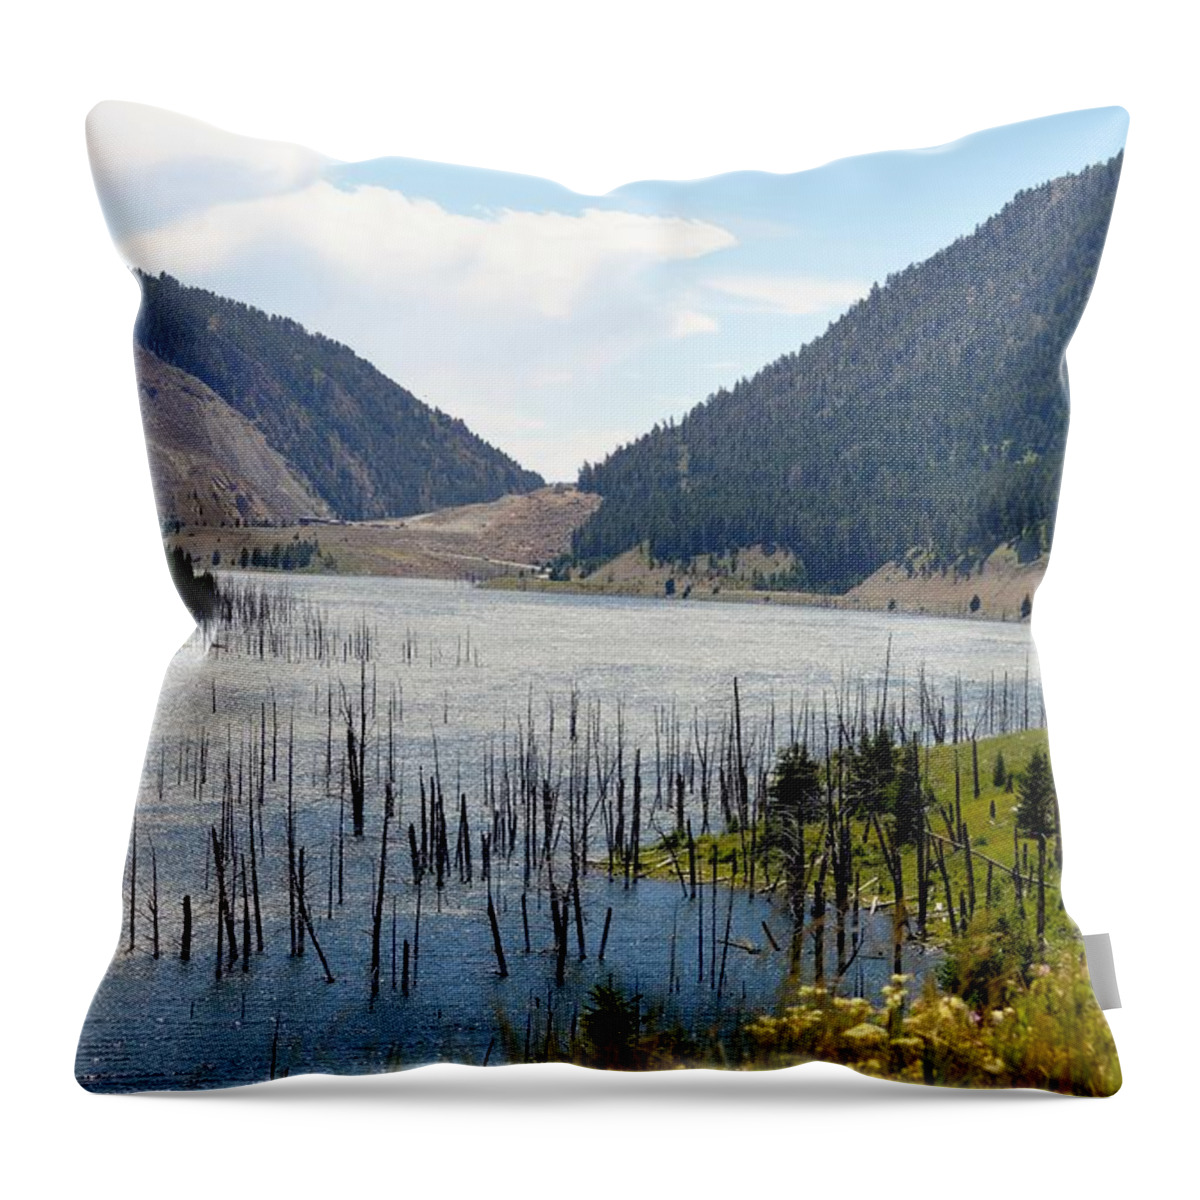  Throw Pillow featuring the photograph Mountain River by Michelle Hoffmann